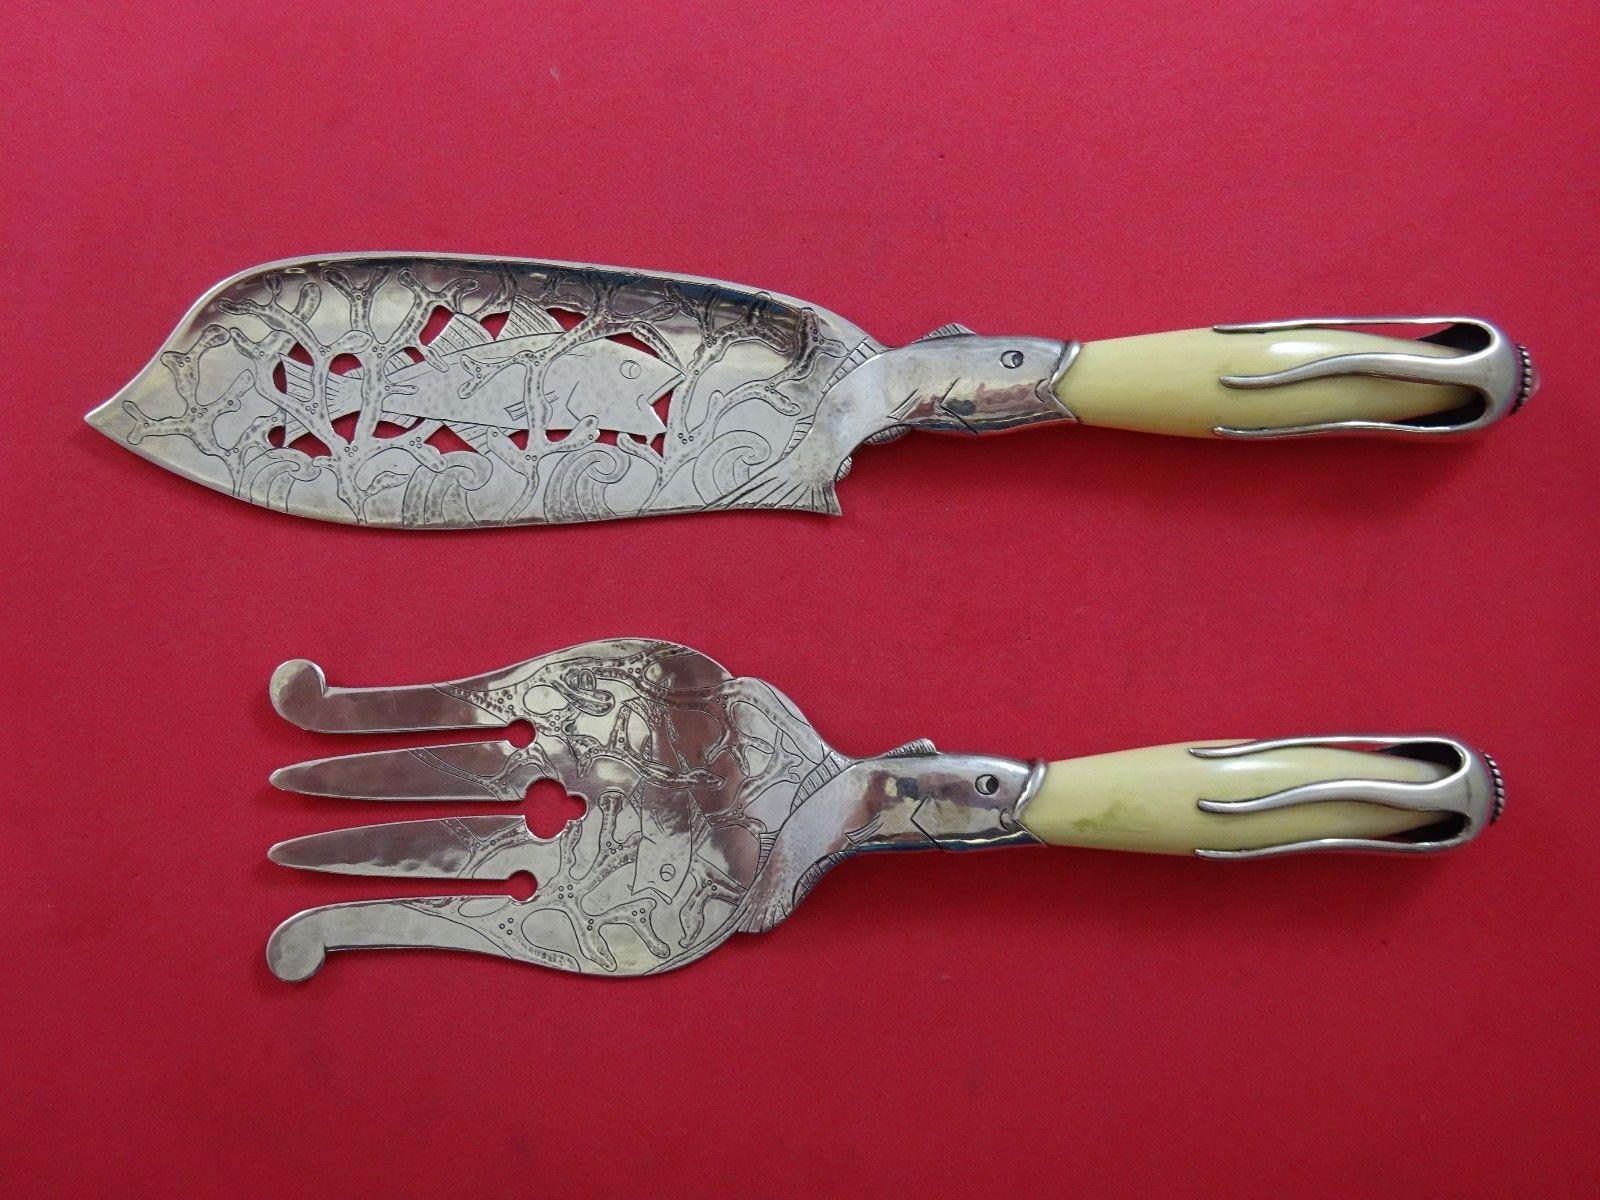 Outstanding Danish sterling silver fish serving set two-piece, which includes:

One fish server, 11 1/4